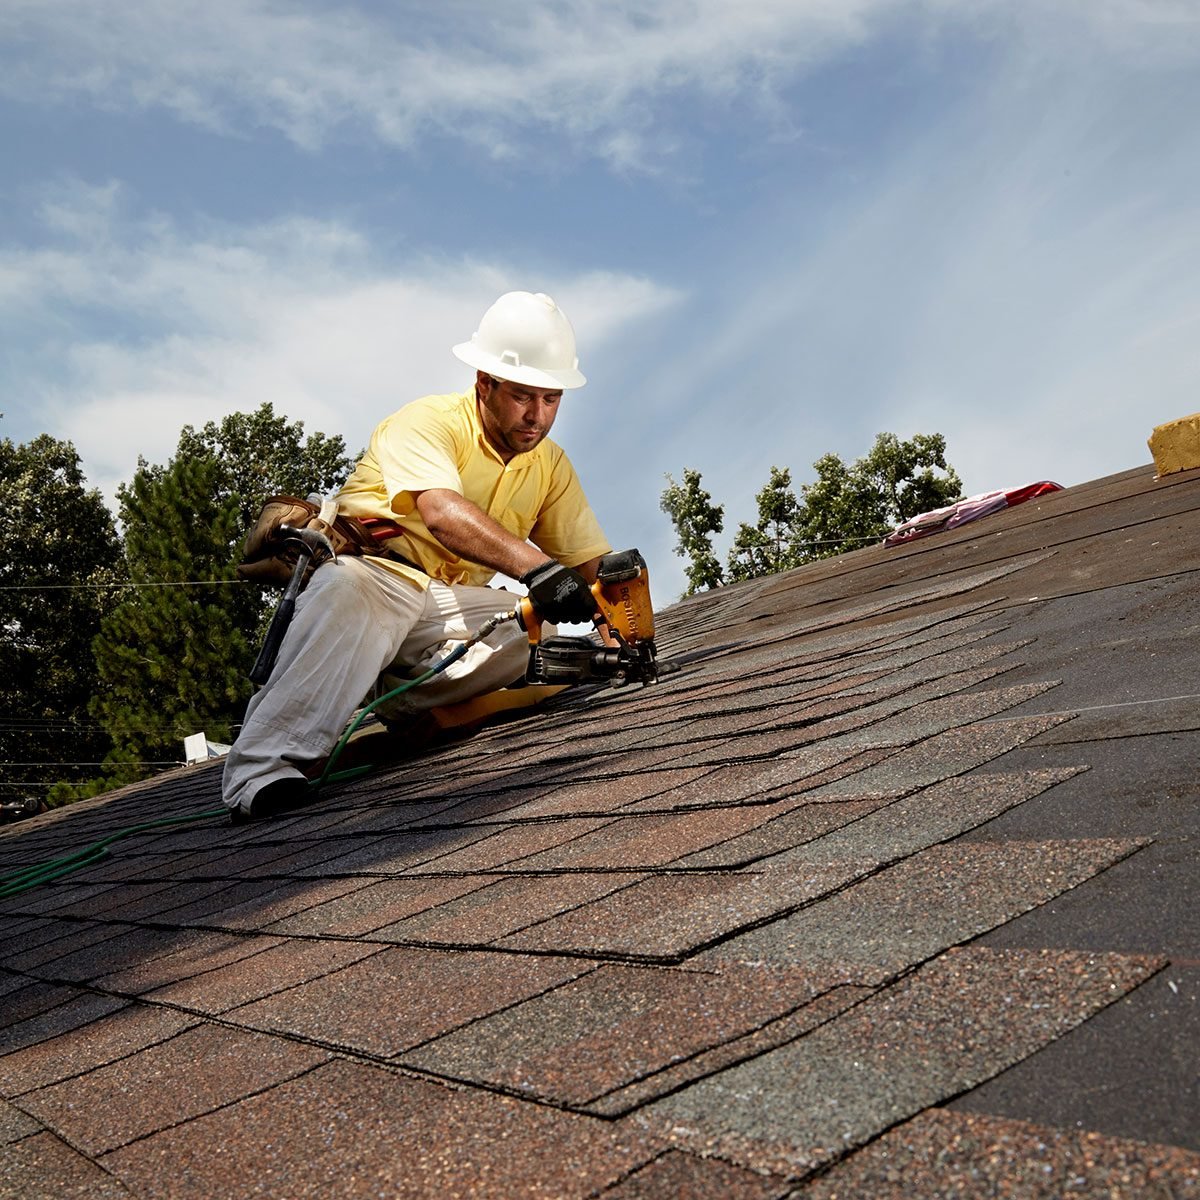 Roofing Archives - Prosper Roofing Company - Roof Repair & Replacement  Contractors